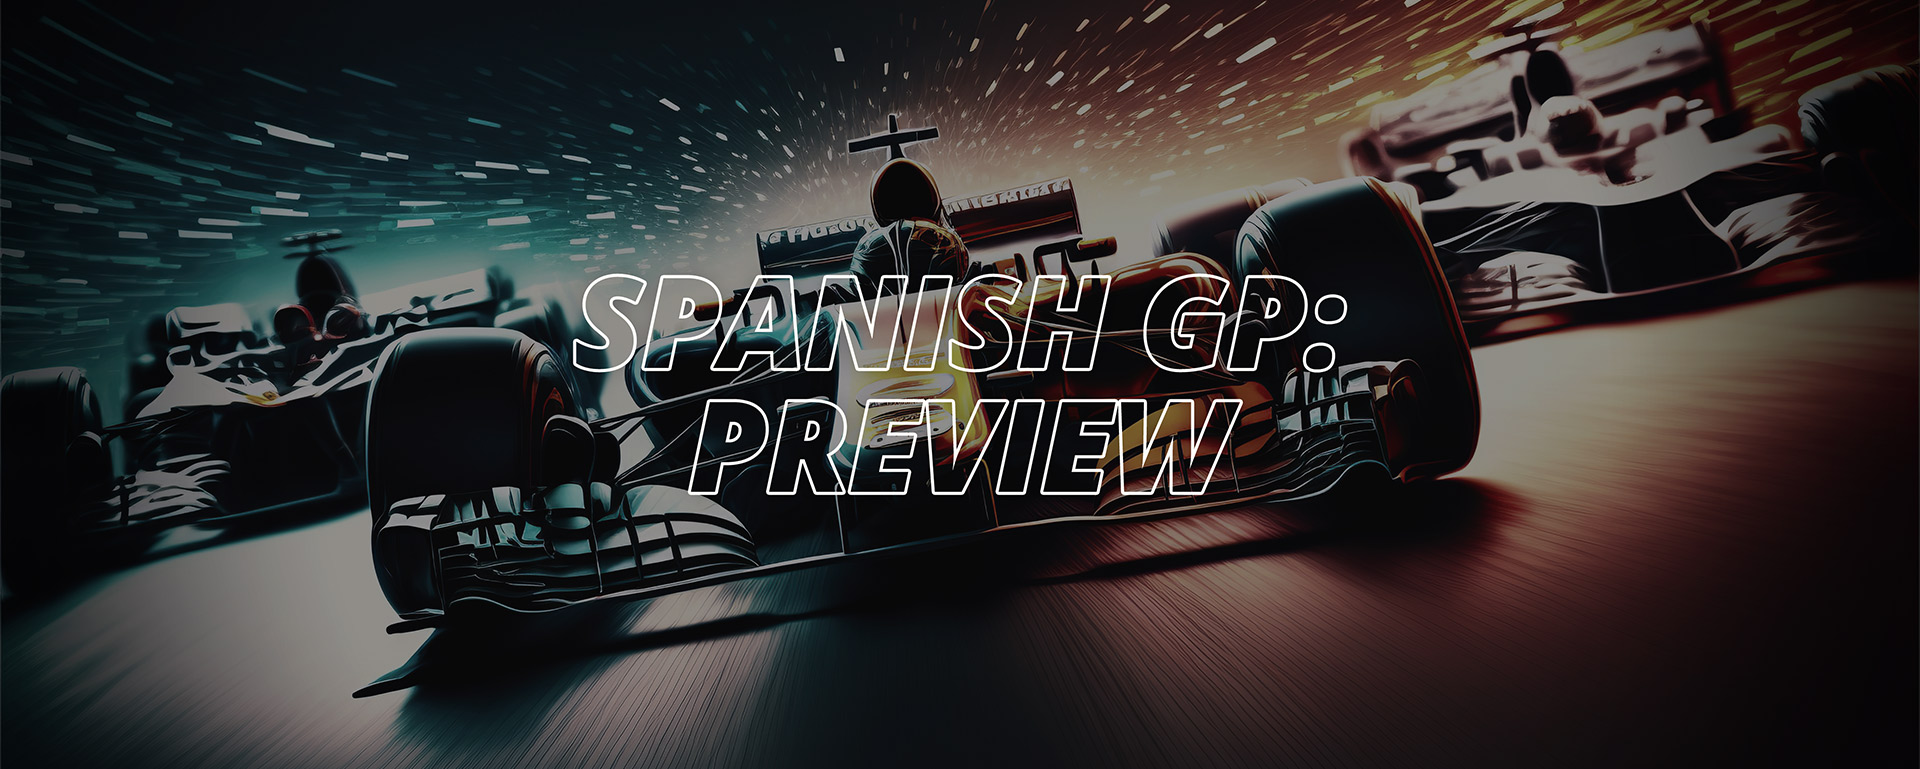 SPANISH GP: PREVIEW